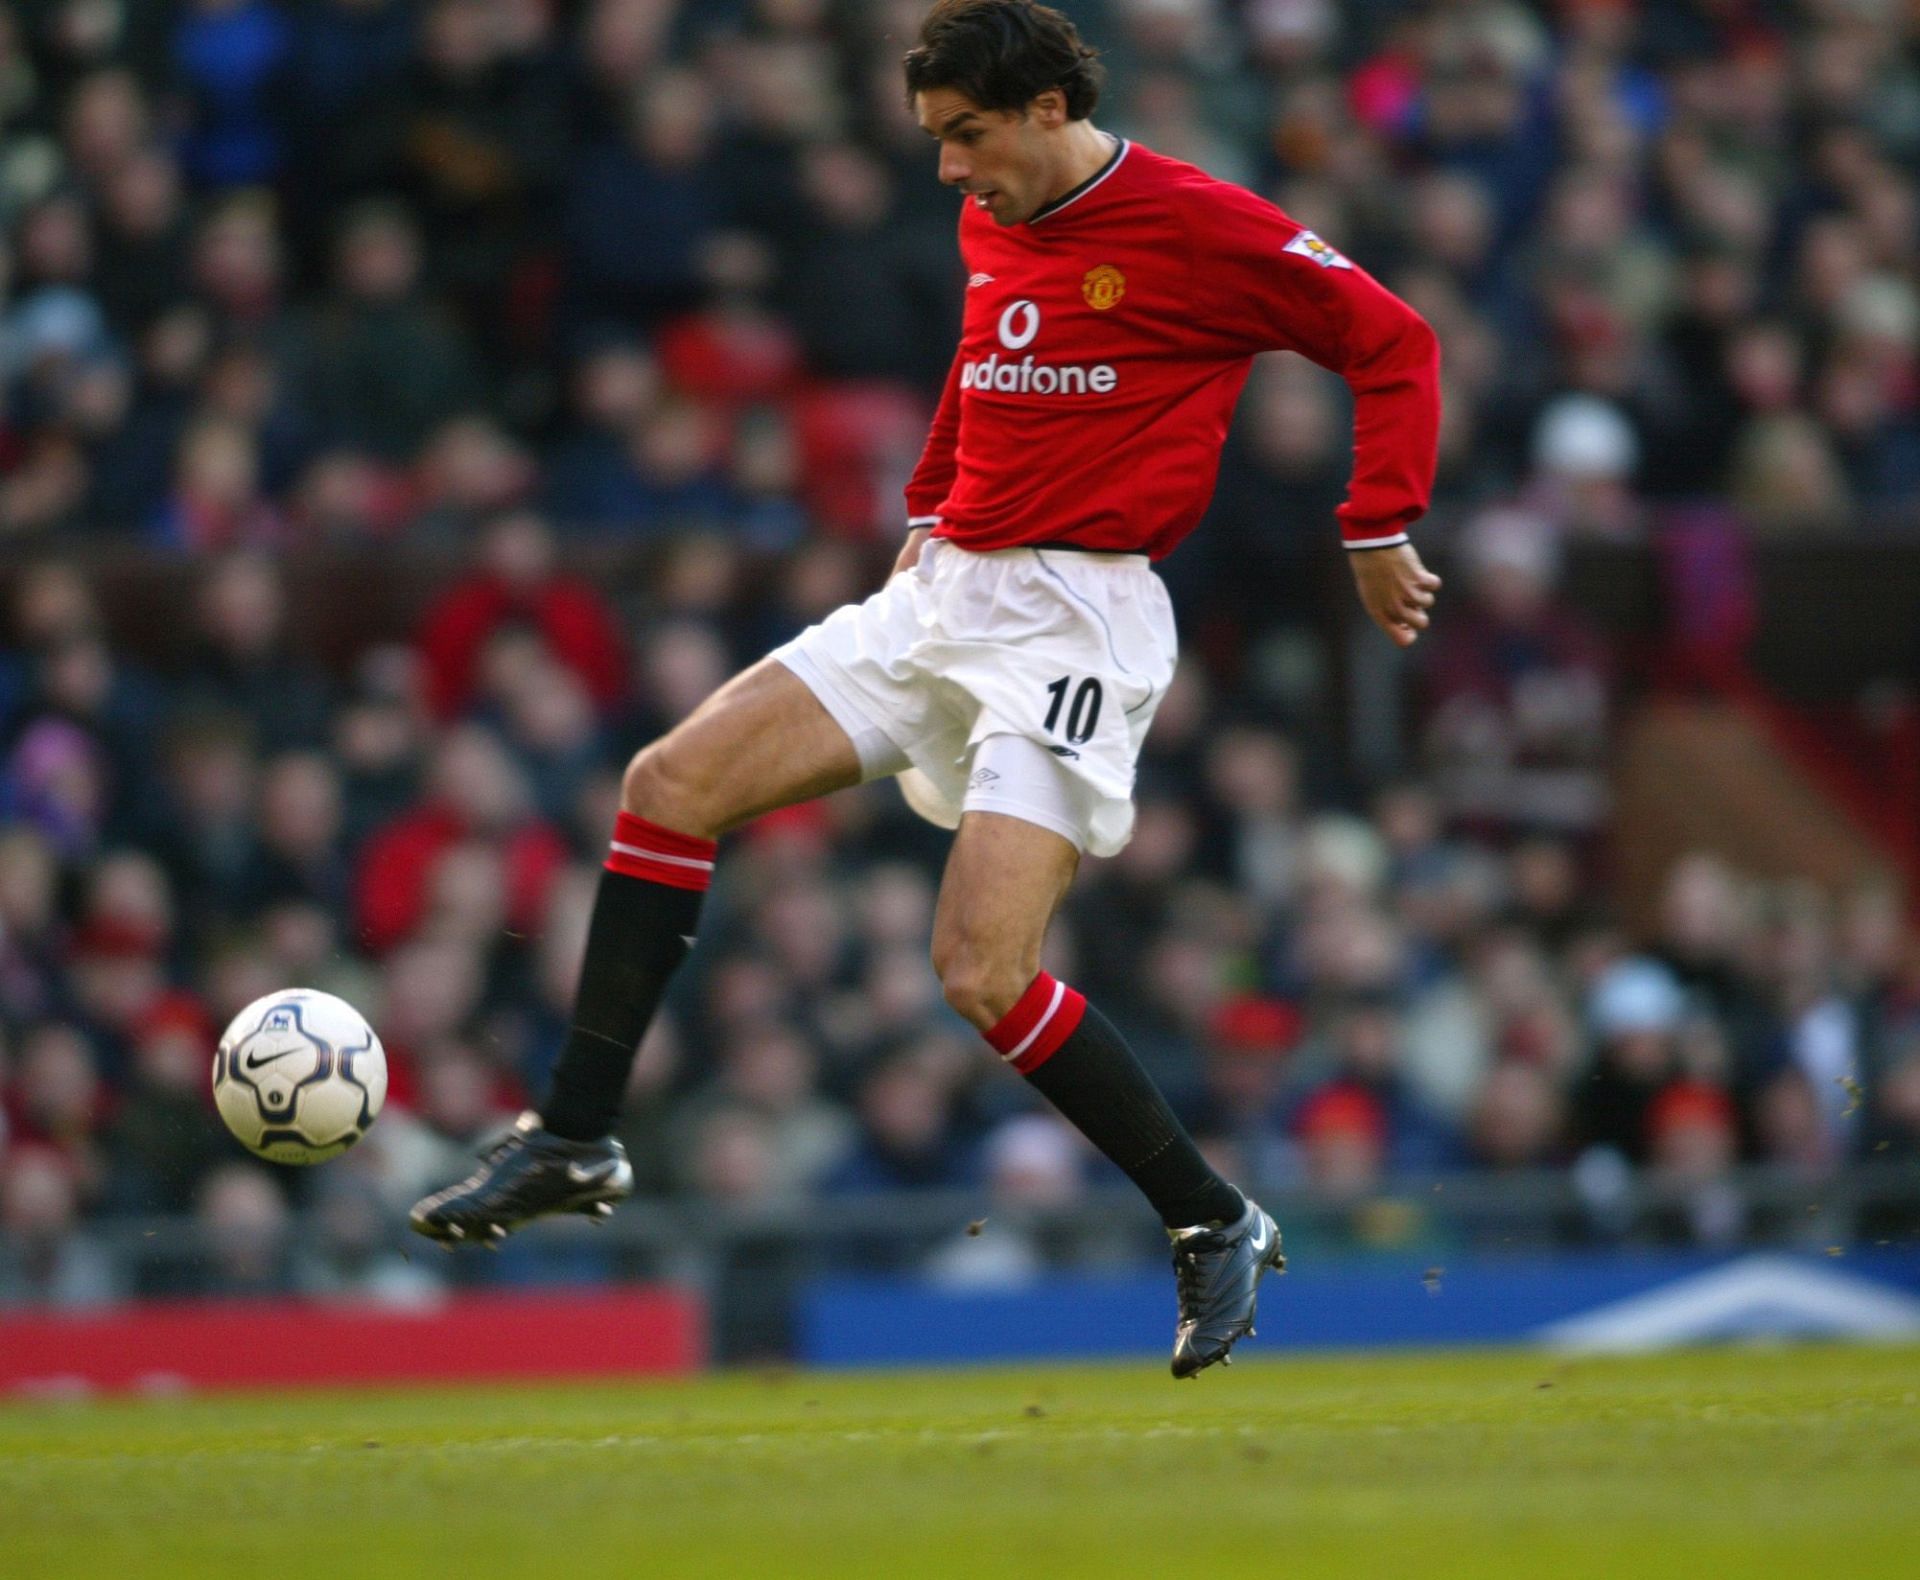 Ruud van Nistelrooy was a goal machine for the Red Devils.